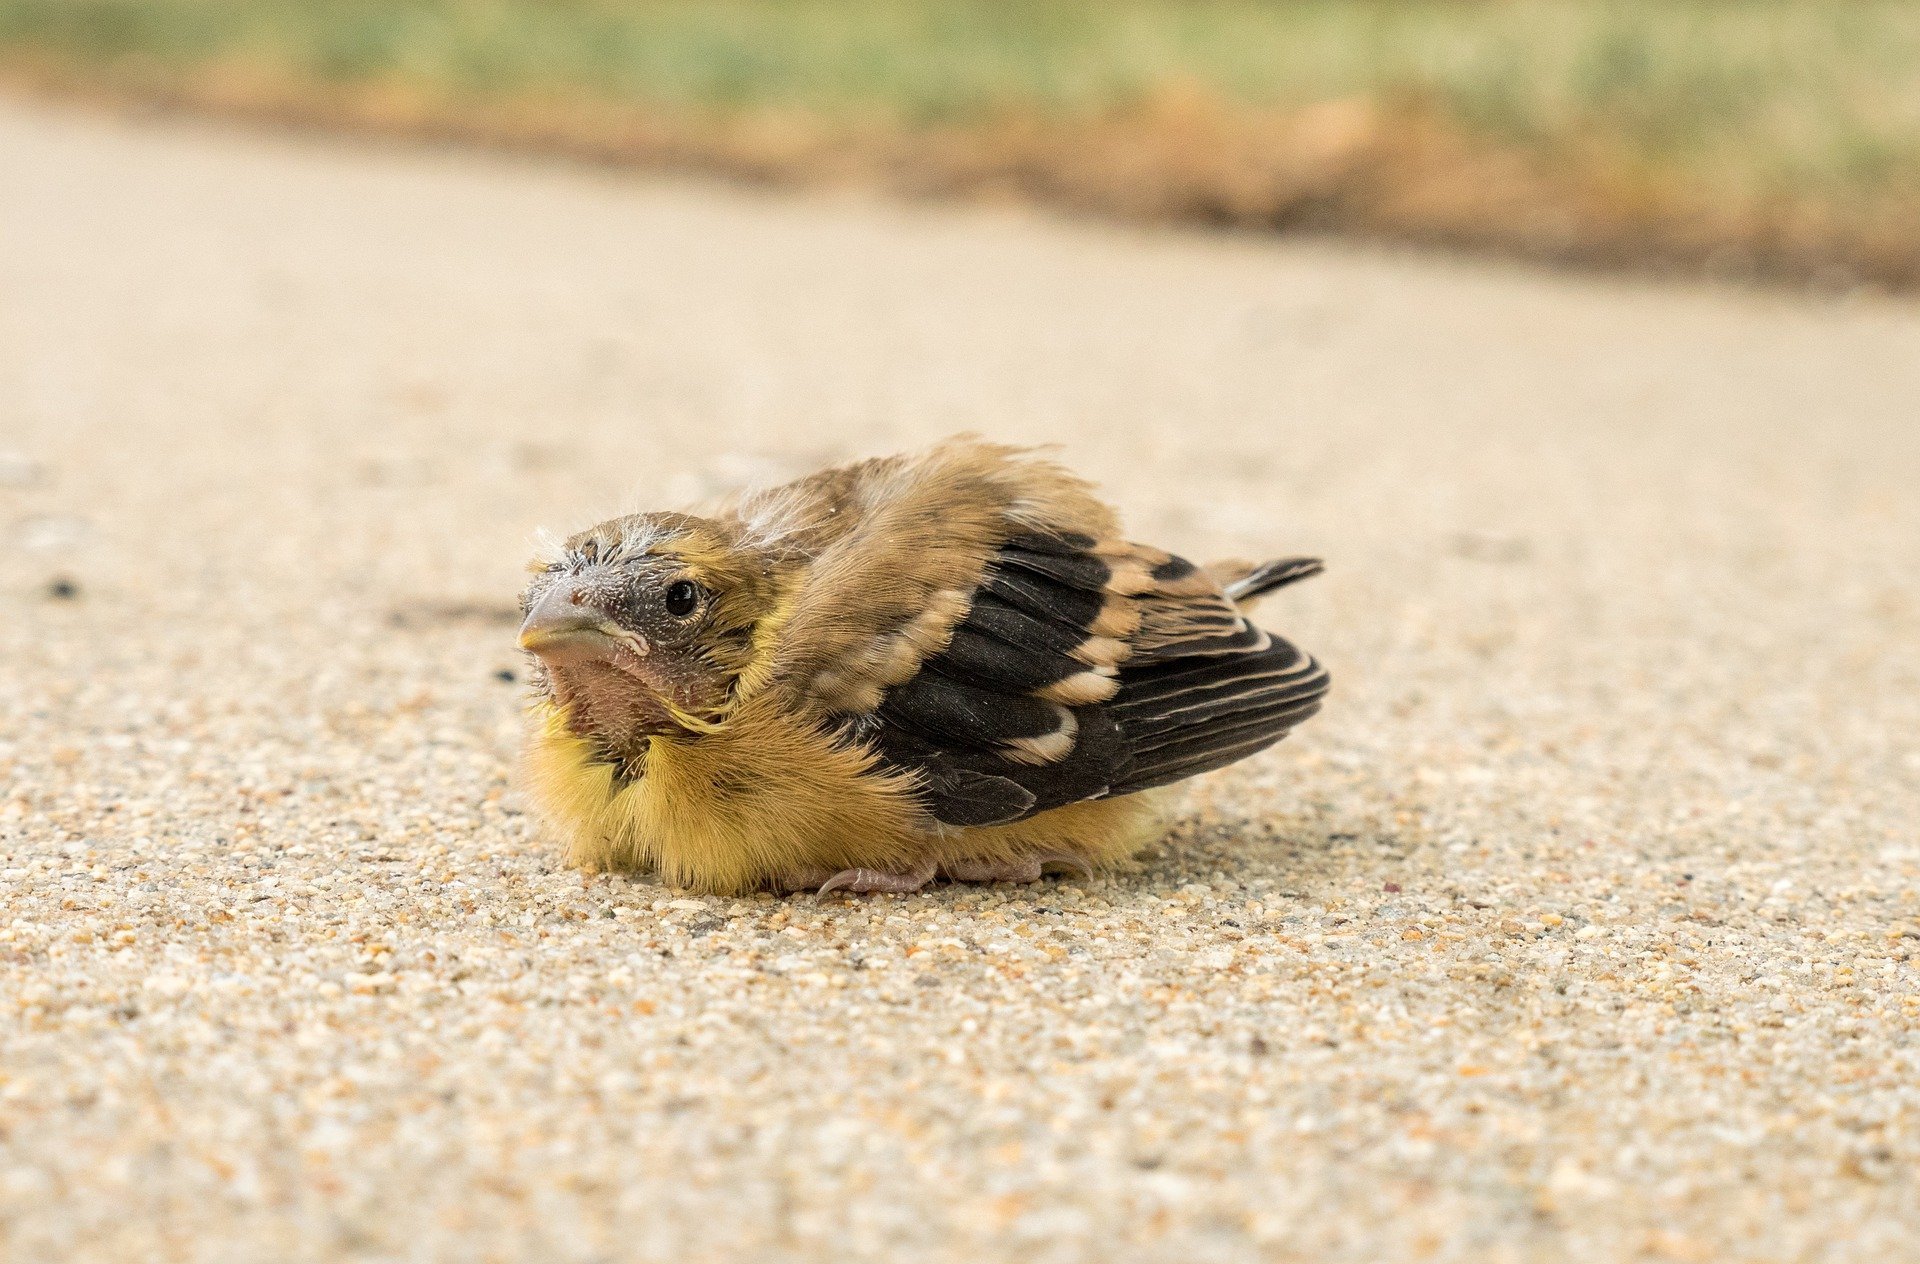 Nature Notes: I found a baby bird, now what?